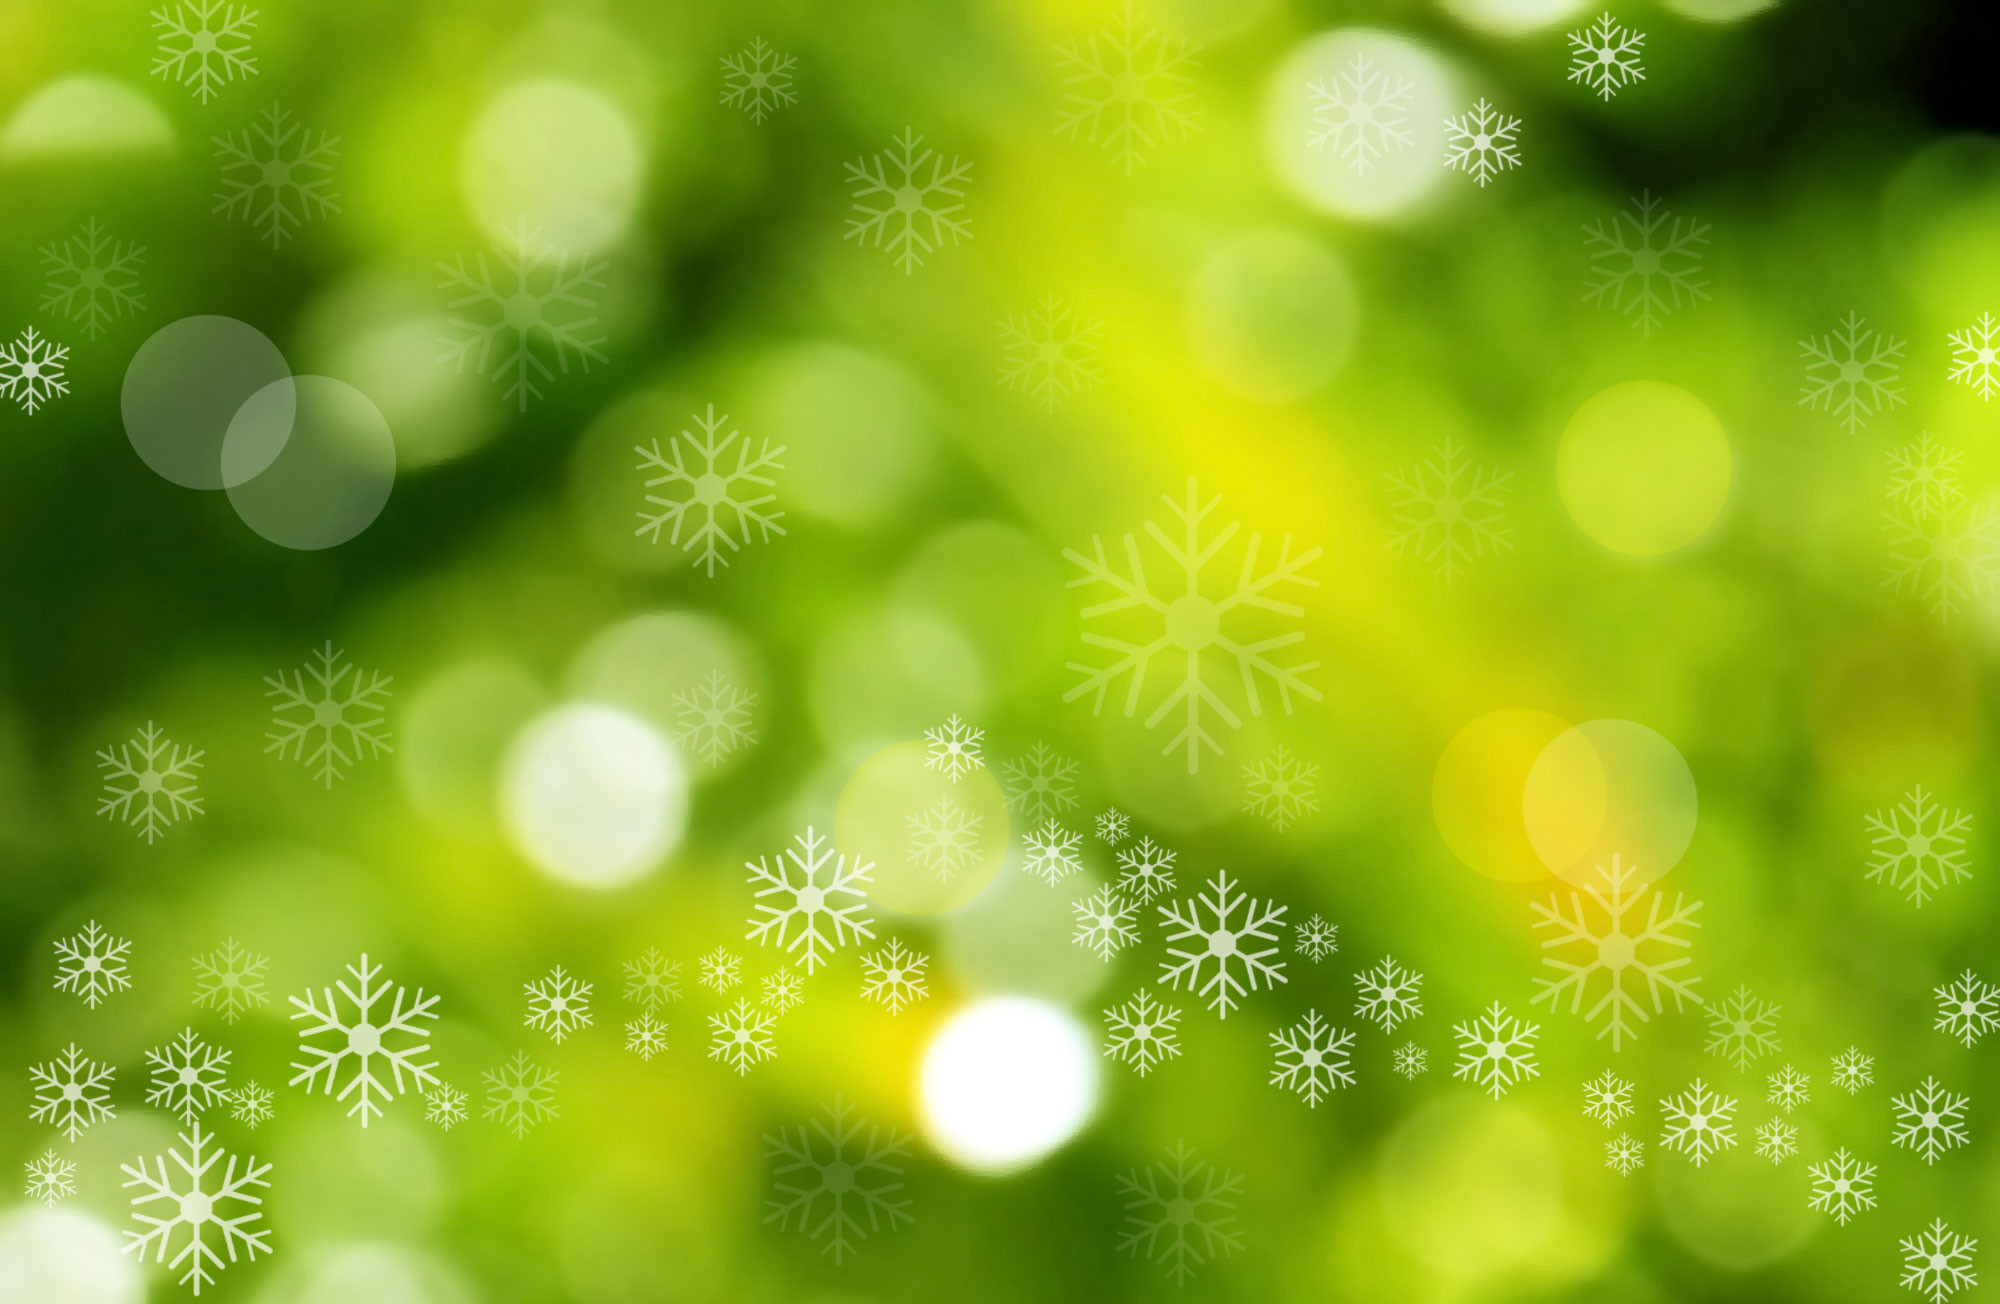 2000x1304 Free Download: Gold Christmas Background | CreativityWindow .